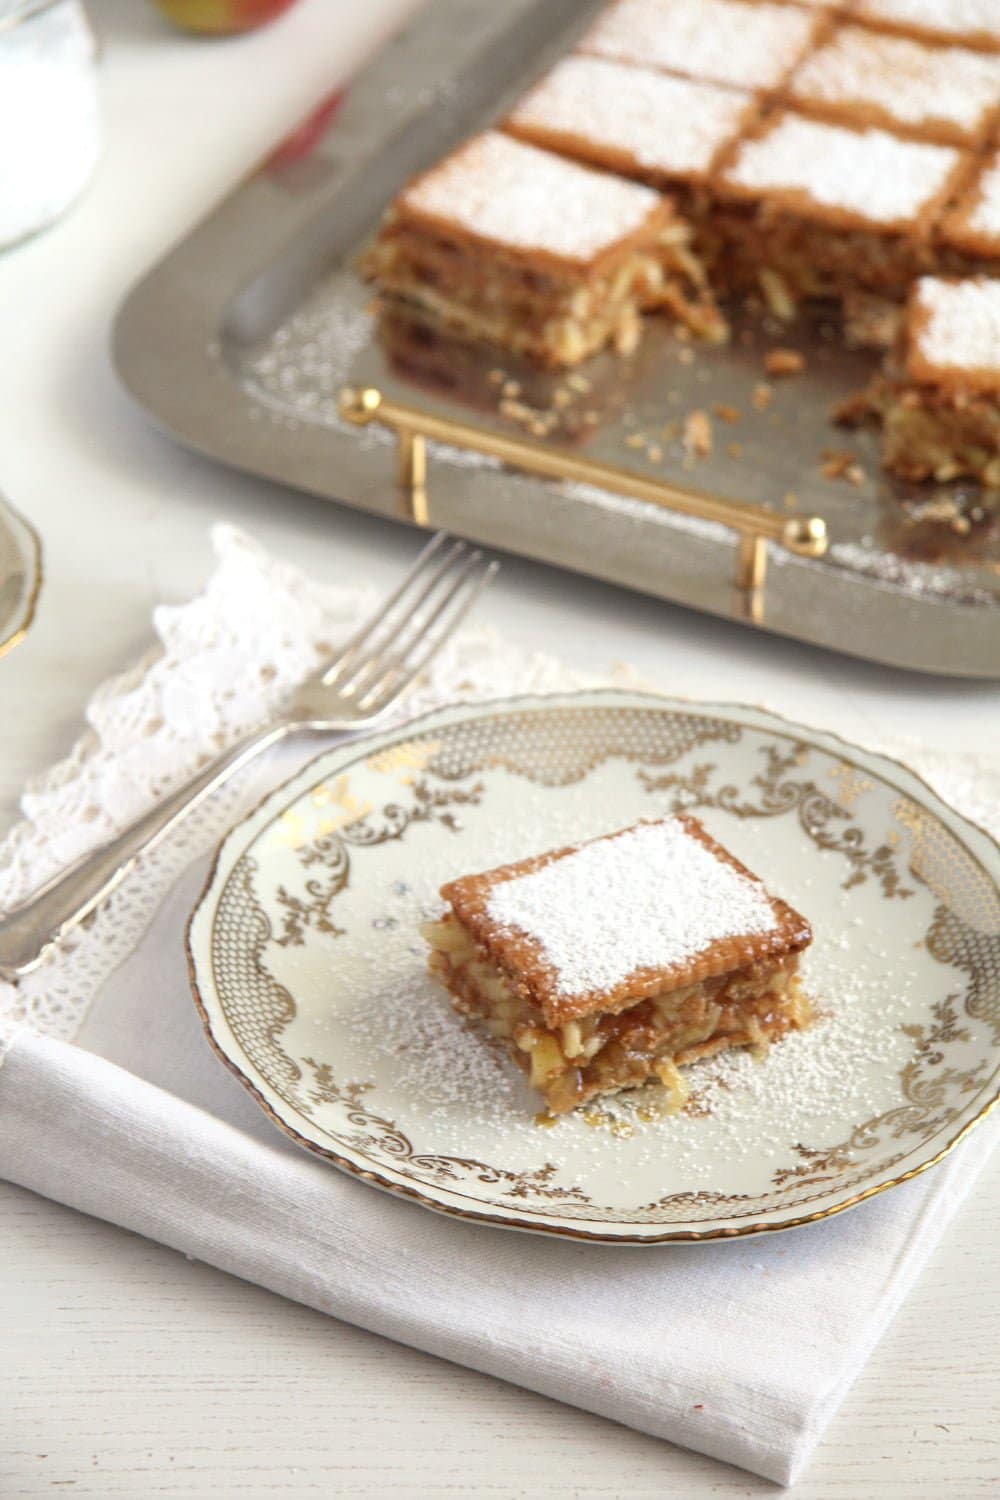 biscuit apple cake sprinkled with icing sugar on vintage dishes